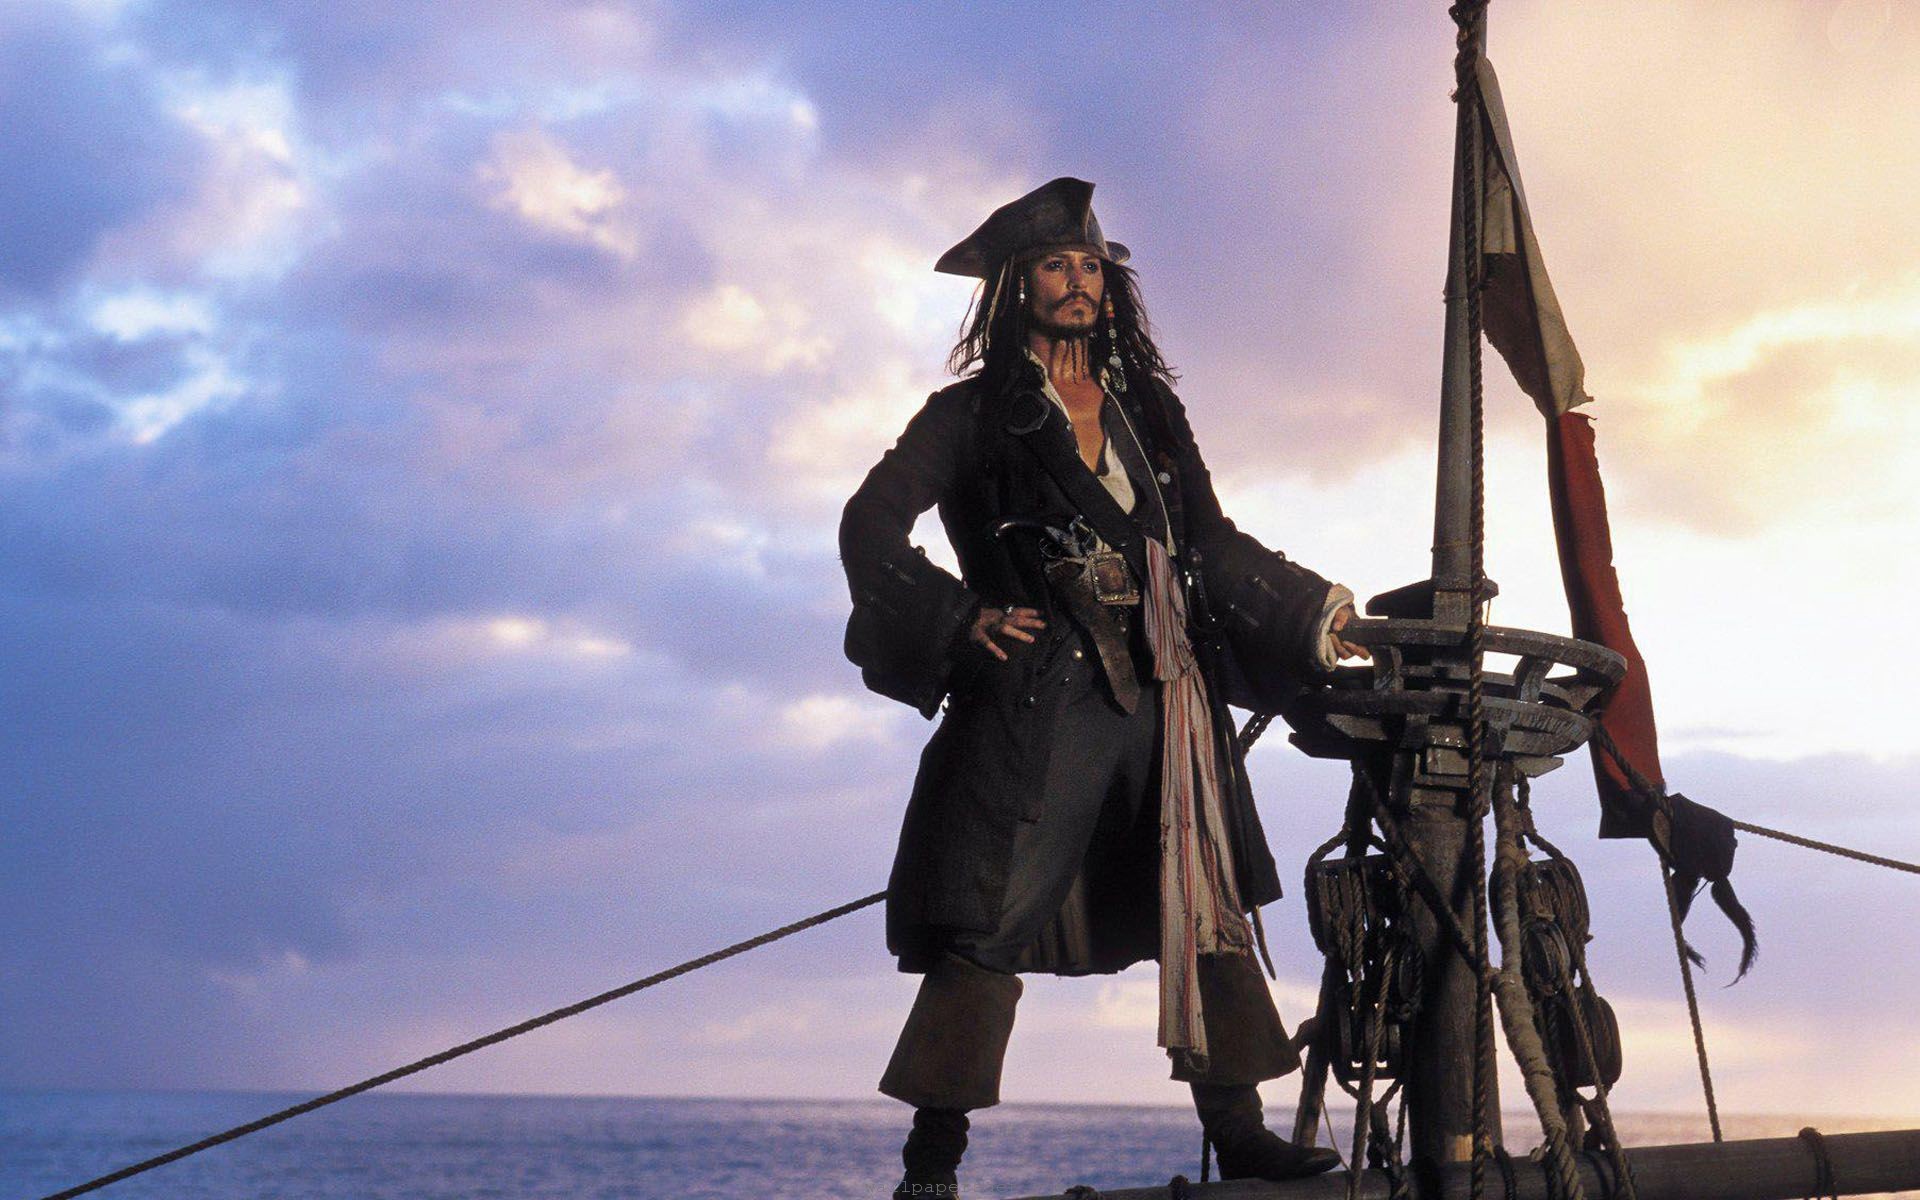 Disney Rumored to Bring Back Johnny Depp For New ‘Pirates of the Caribbean’ Film